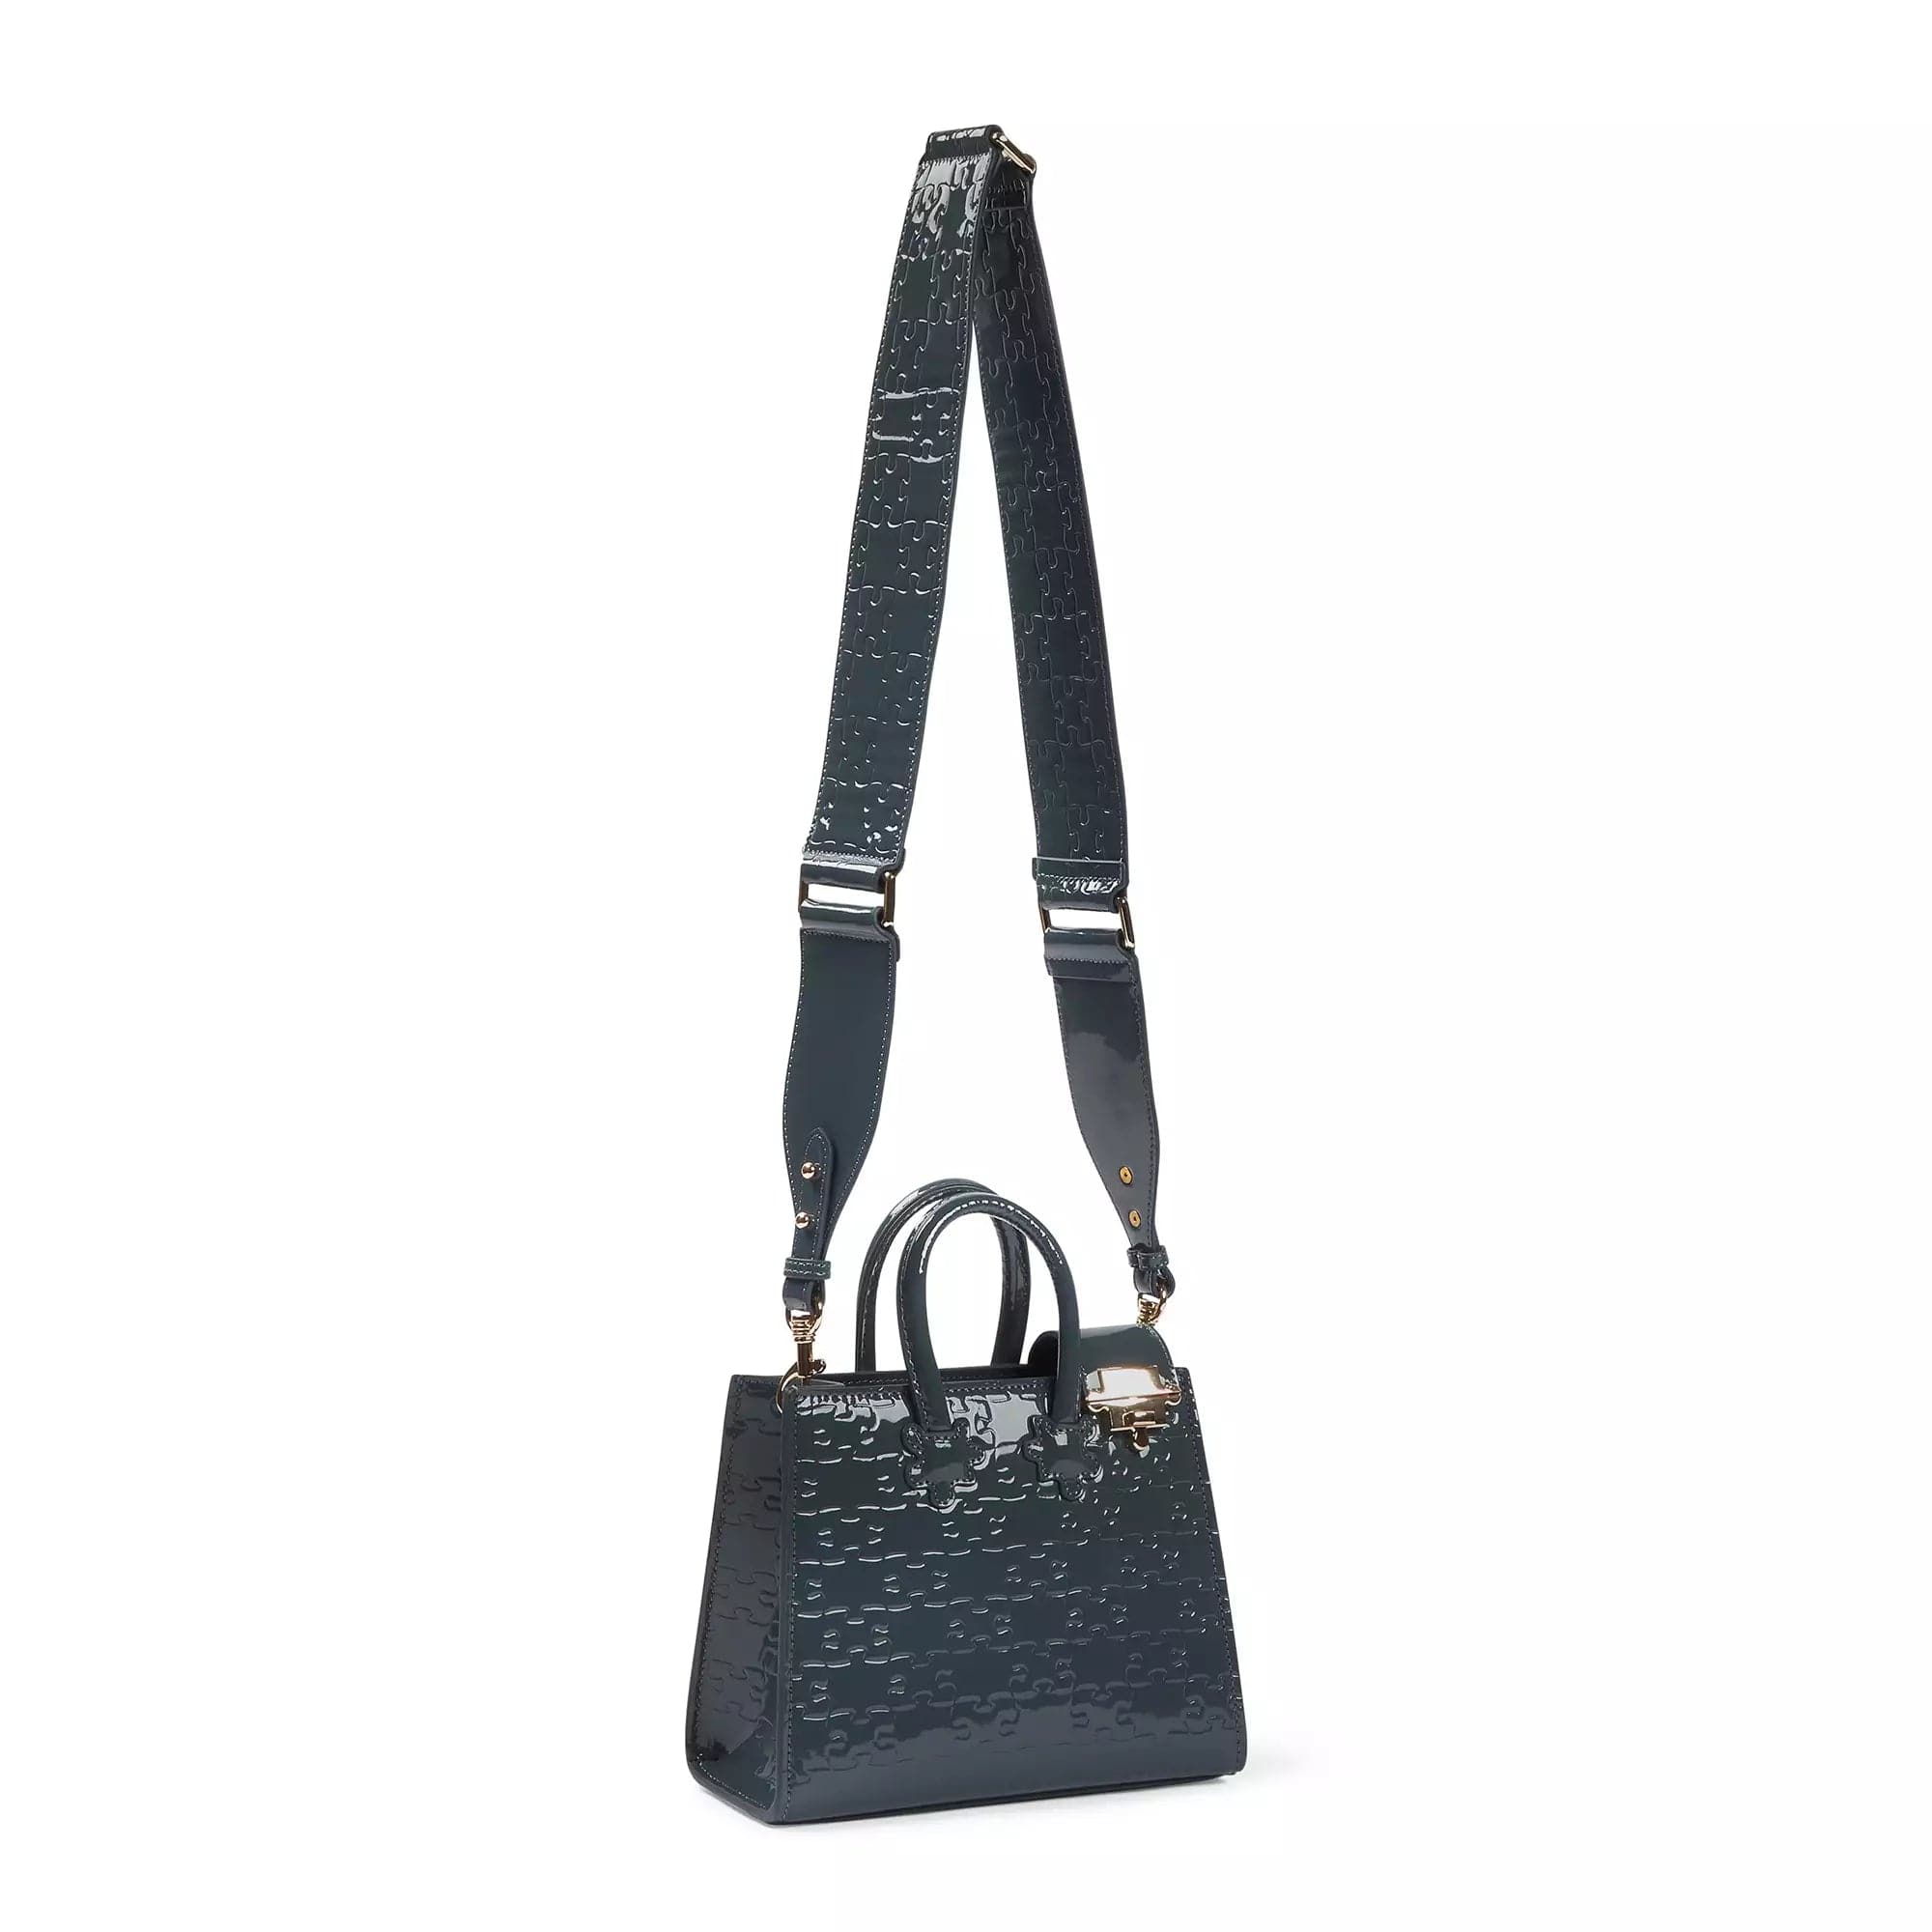 Ibukun Tiny Tote | Patent Leather - Blueberry in